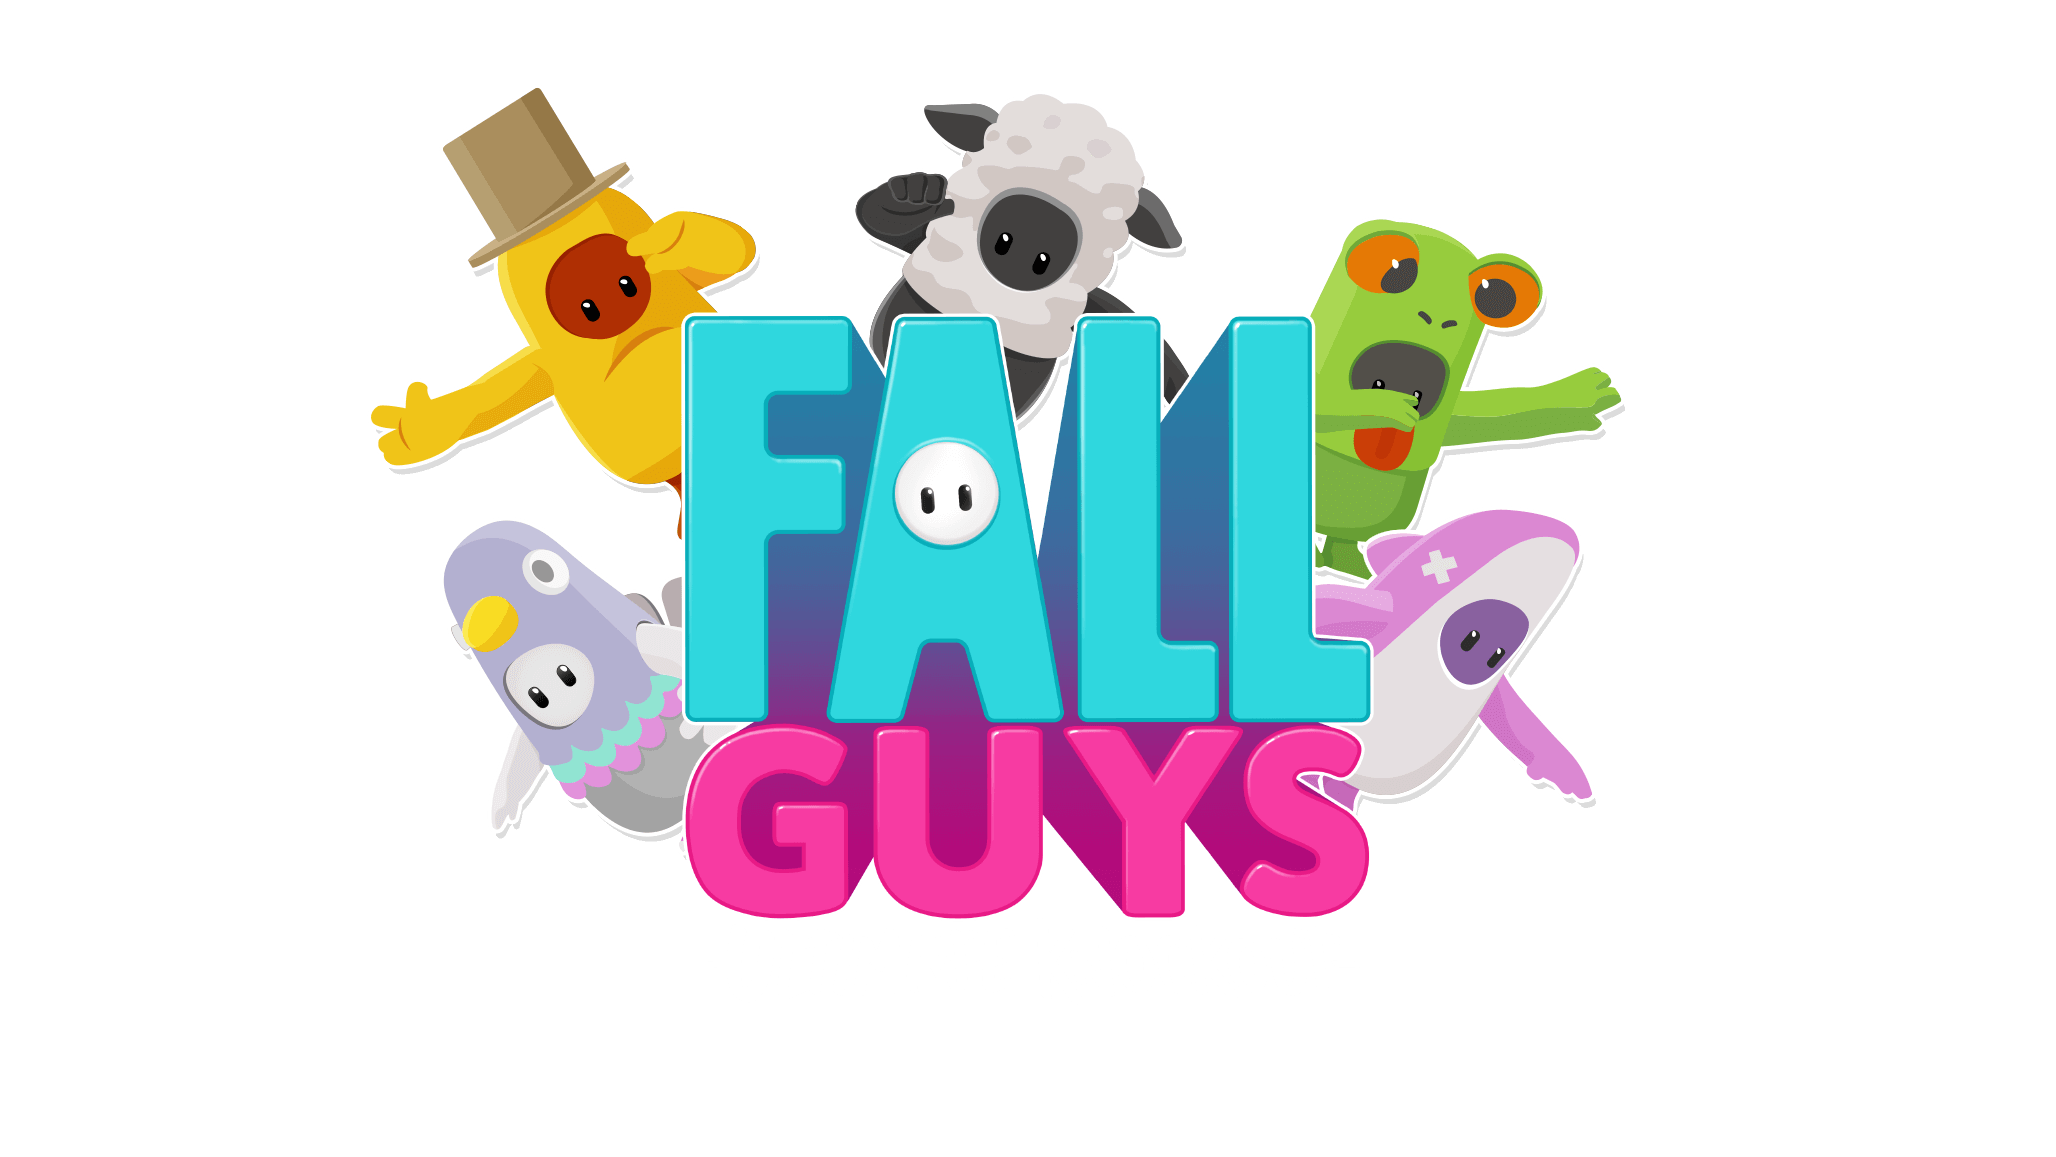 Fall Guys sells 2 million copies on Steam in under a week